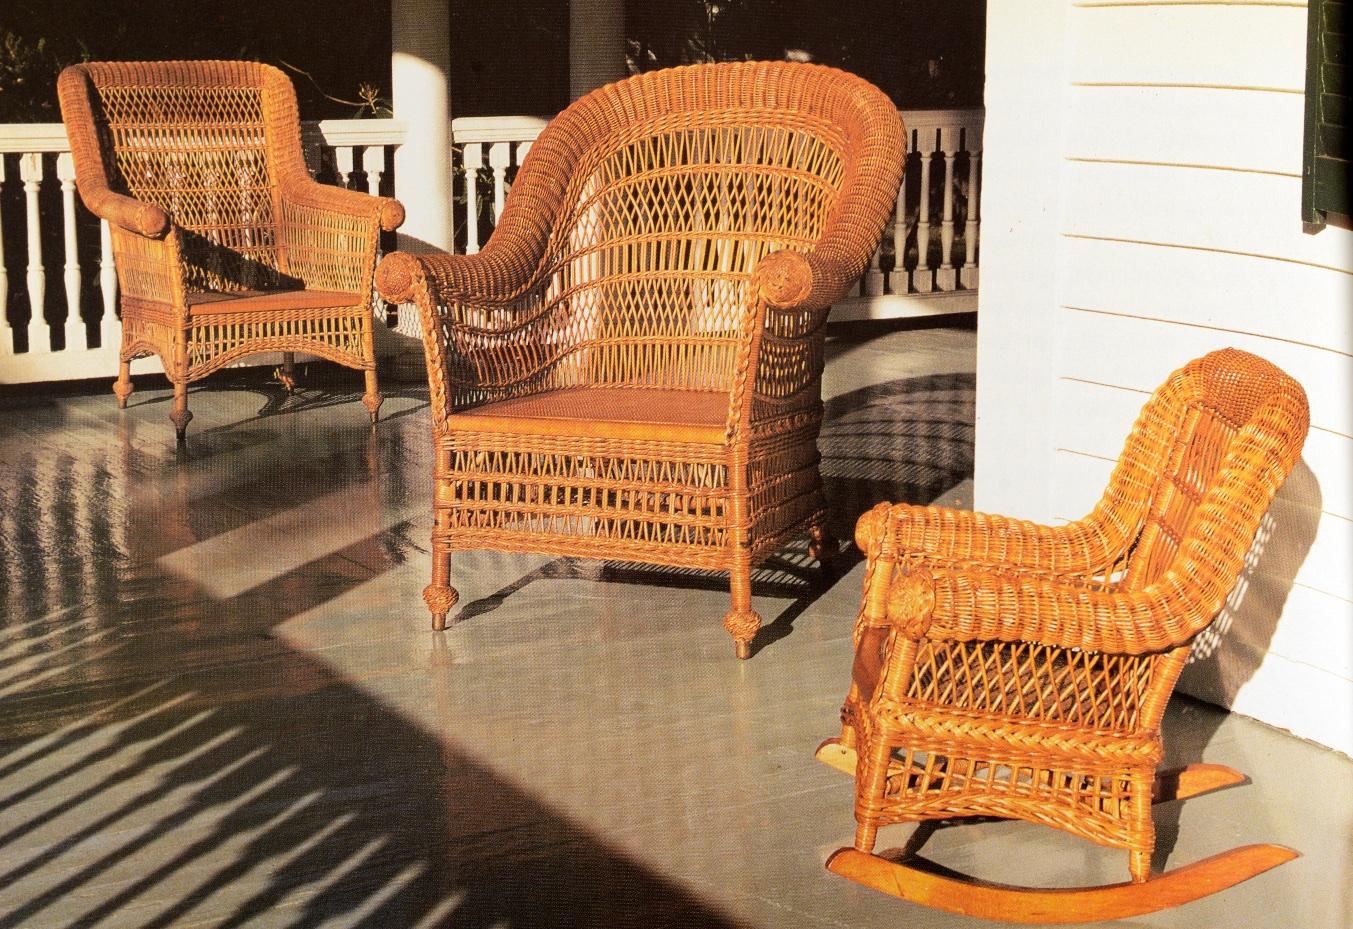 American Wicker Woven Furniture from 1850 to 1930 by Jeremy Adamson, 1st Ed For Sale 3